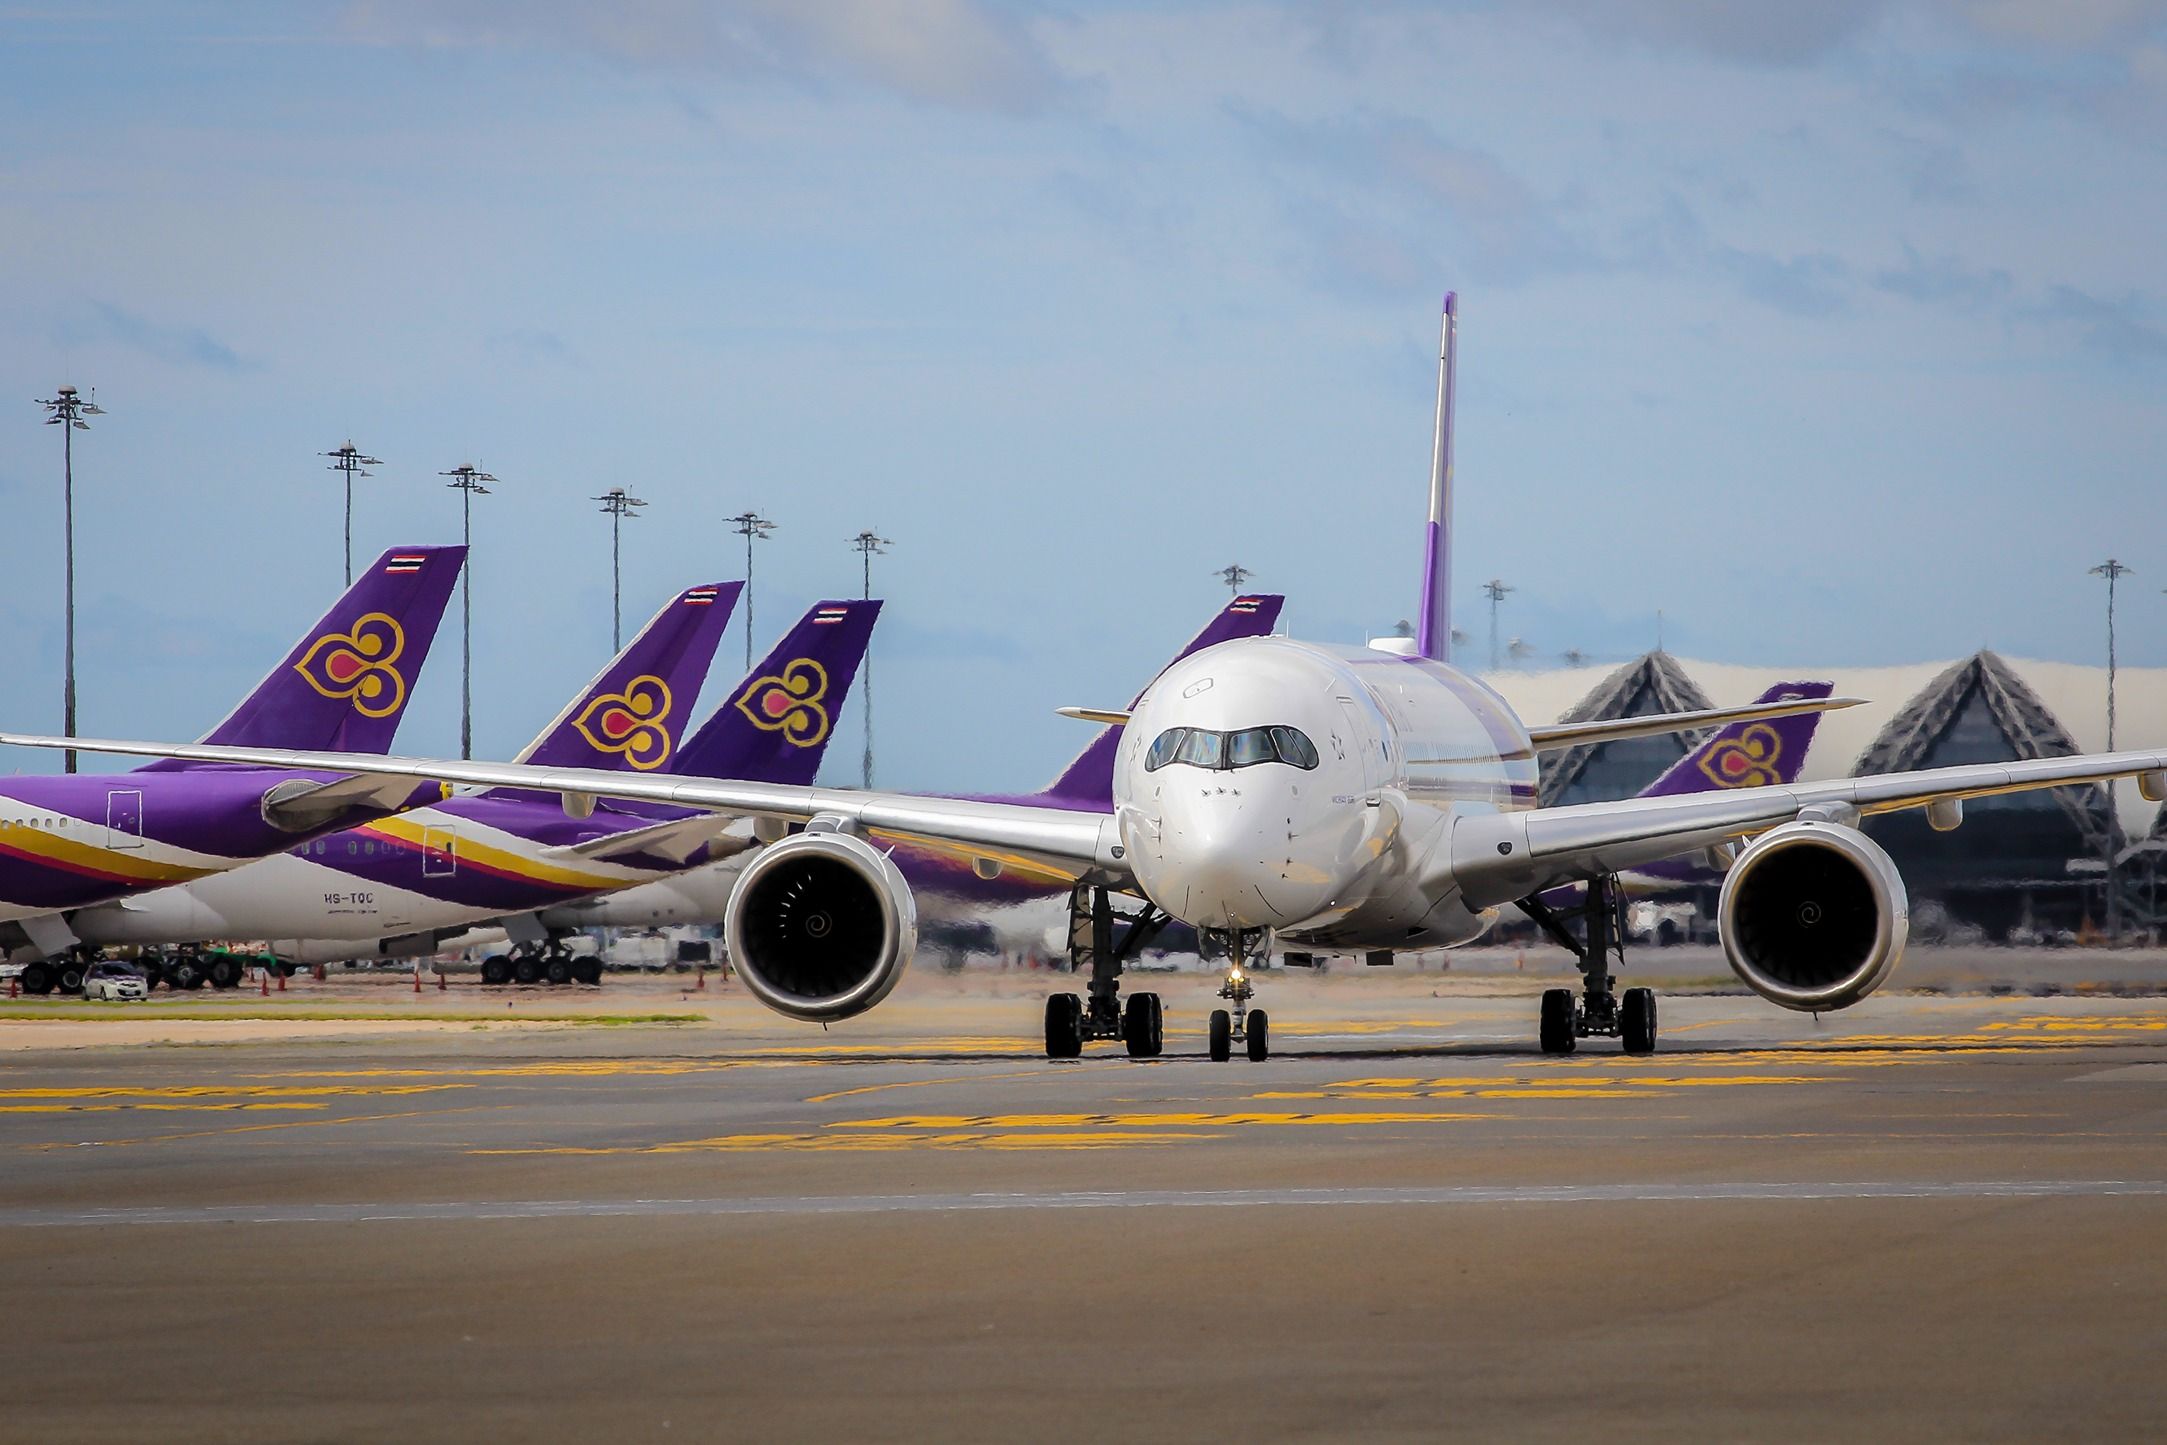 Thai Airways Airbus A350 with other Thai Airways aircraft in the background